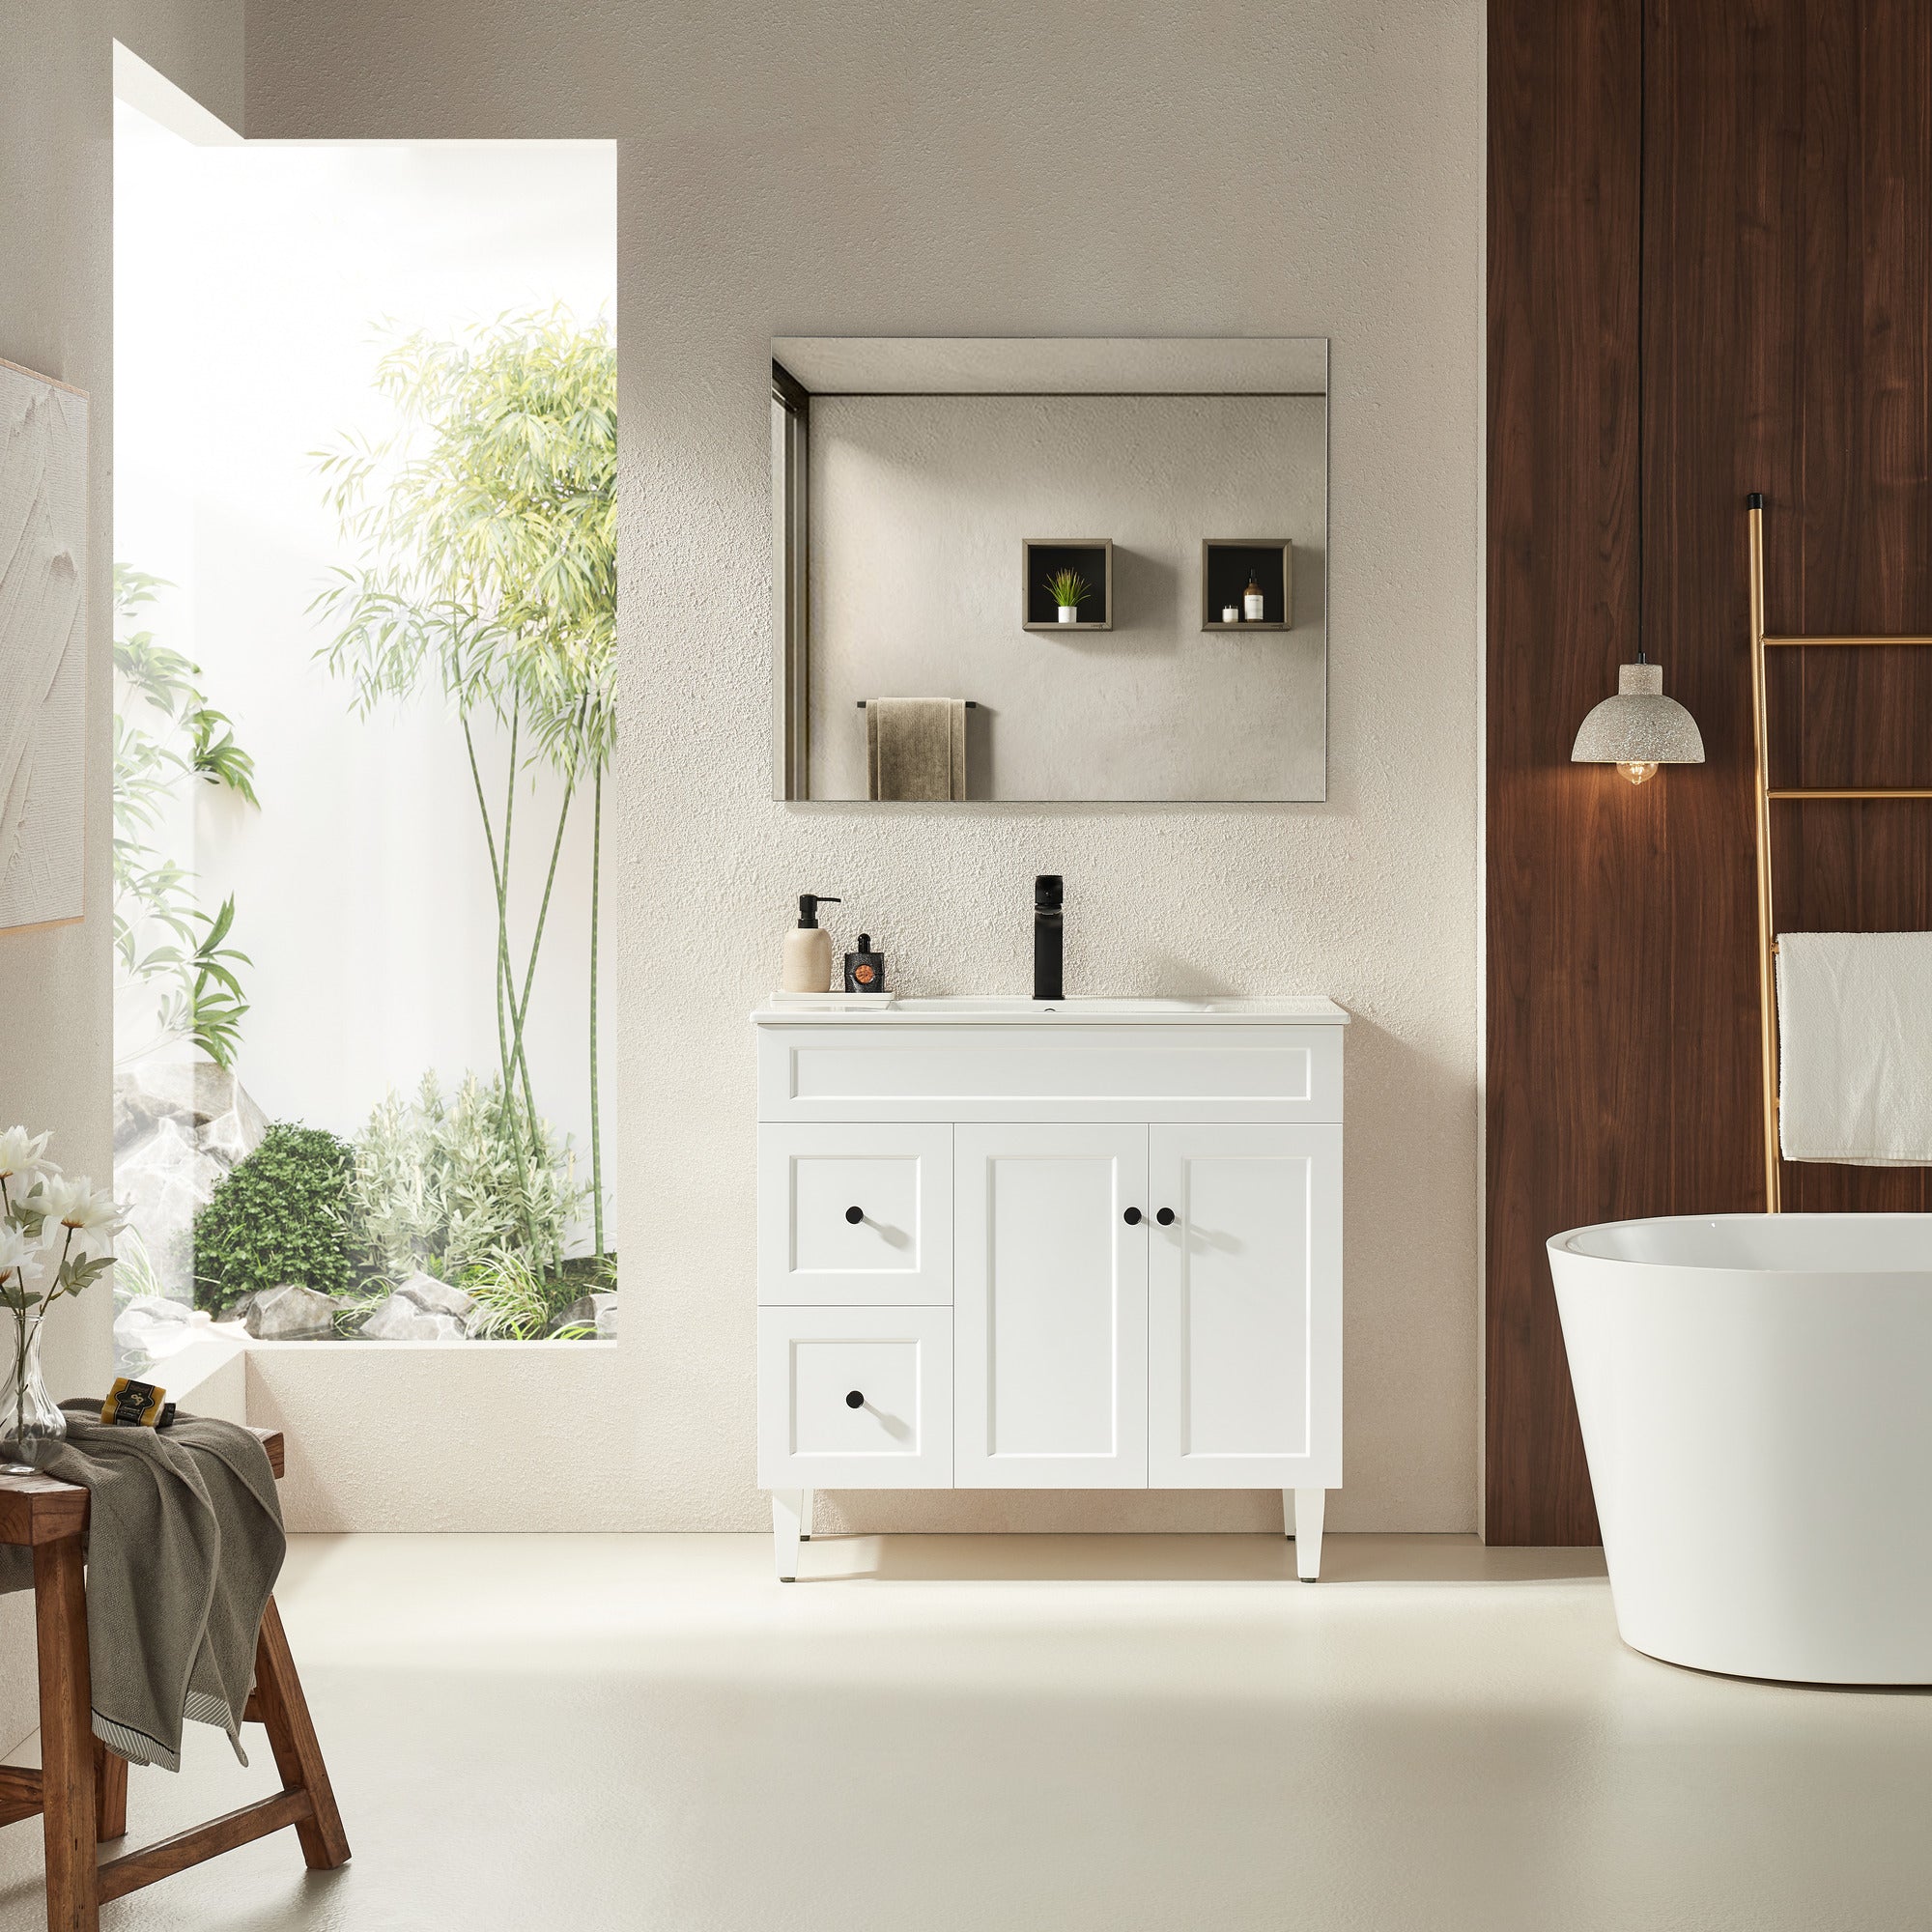 CETO HARRINGTON MATTE WHITE 900MM SINGLE BOWL FLOOR STANDING VANITY (AVAILABLE IN LEFT AND RIGHT HAND DRAWER)